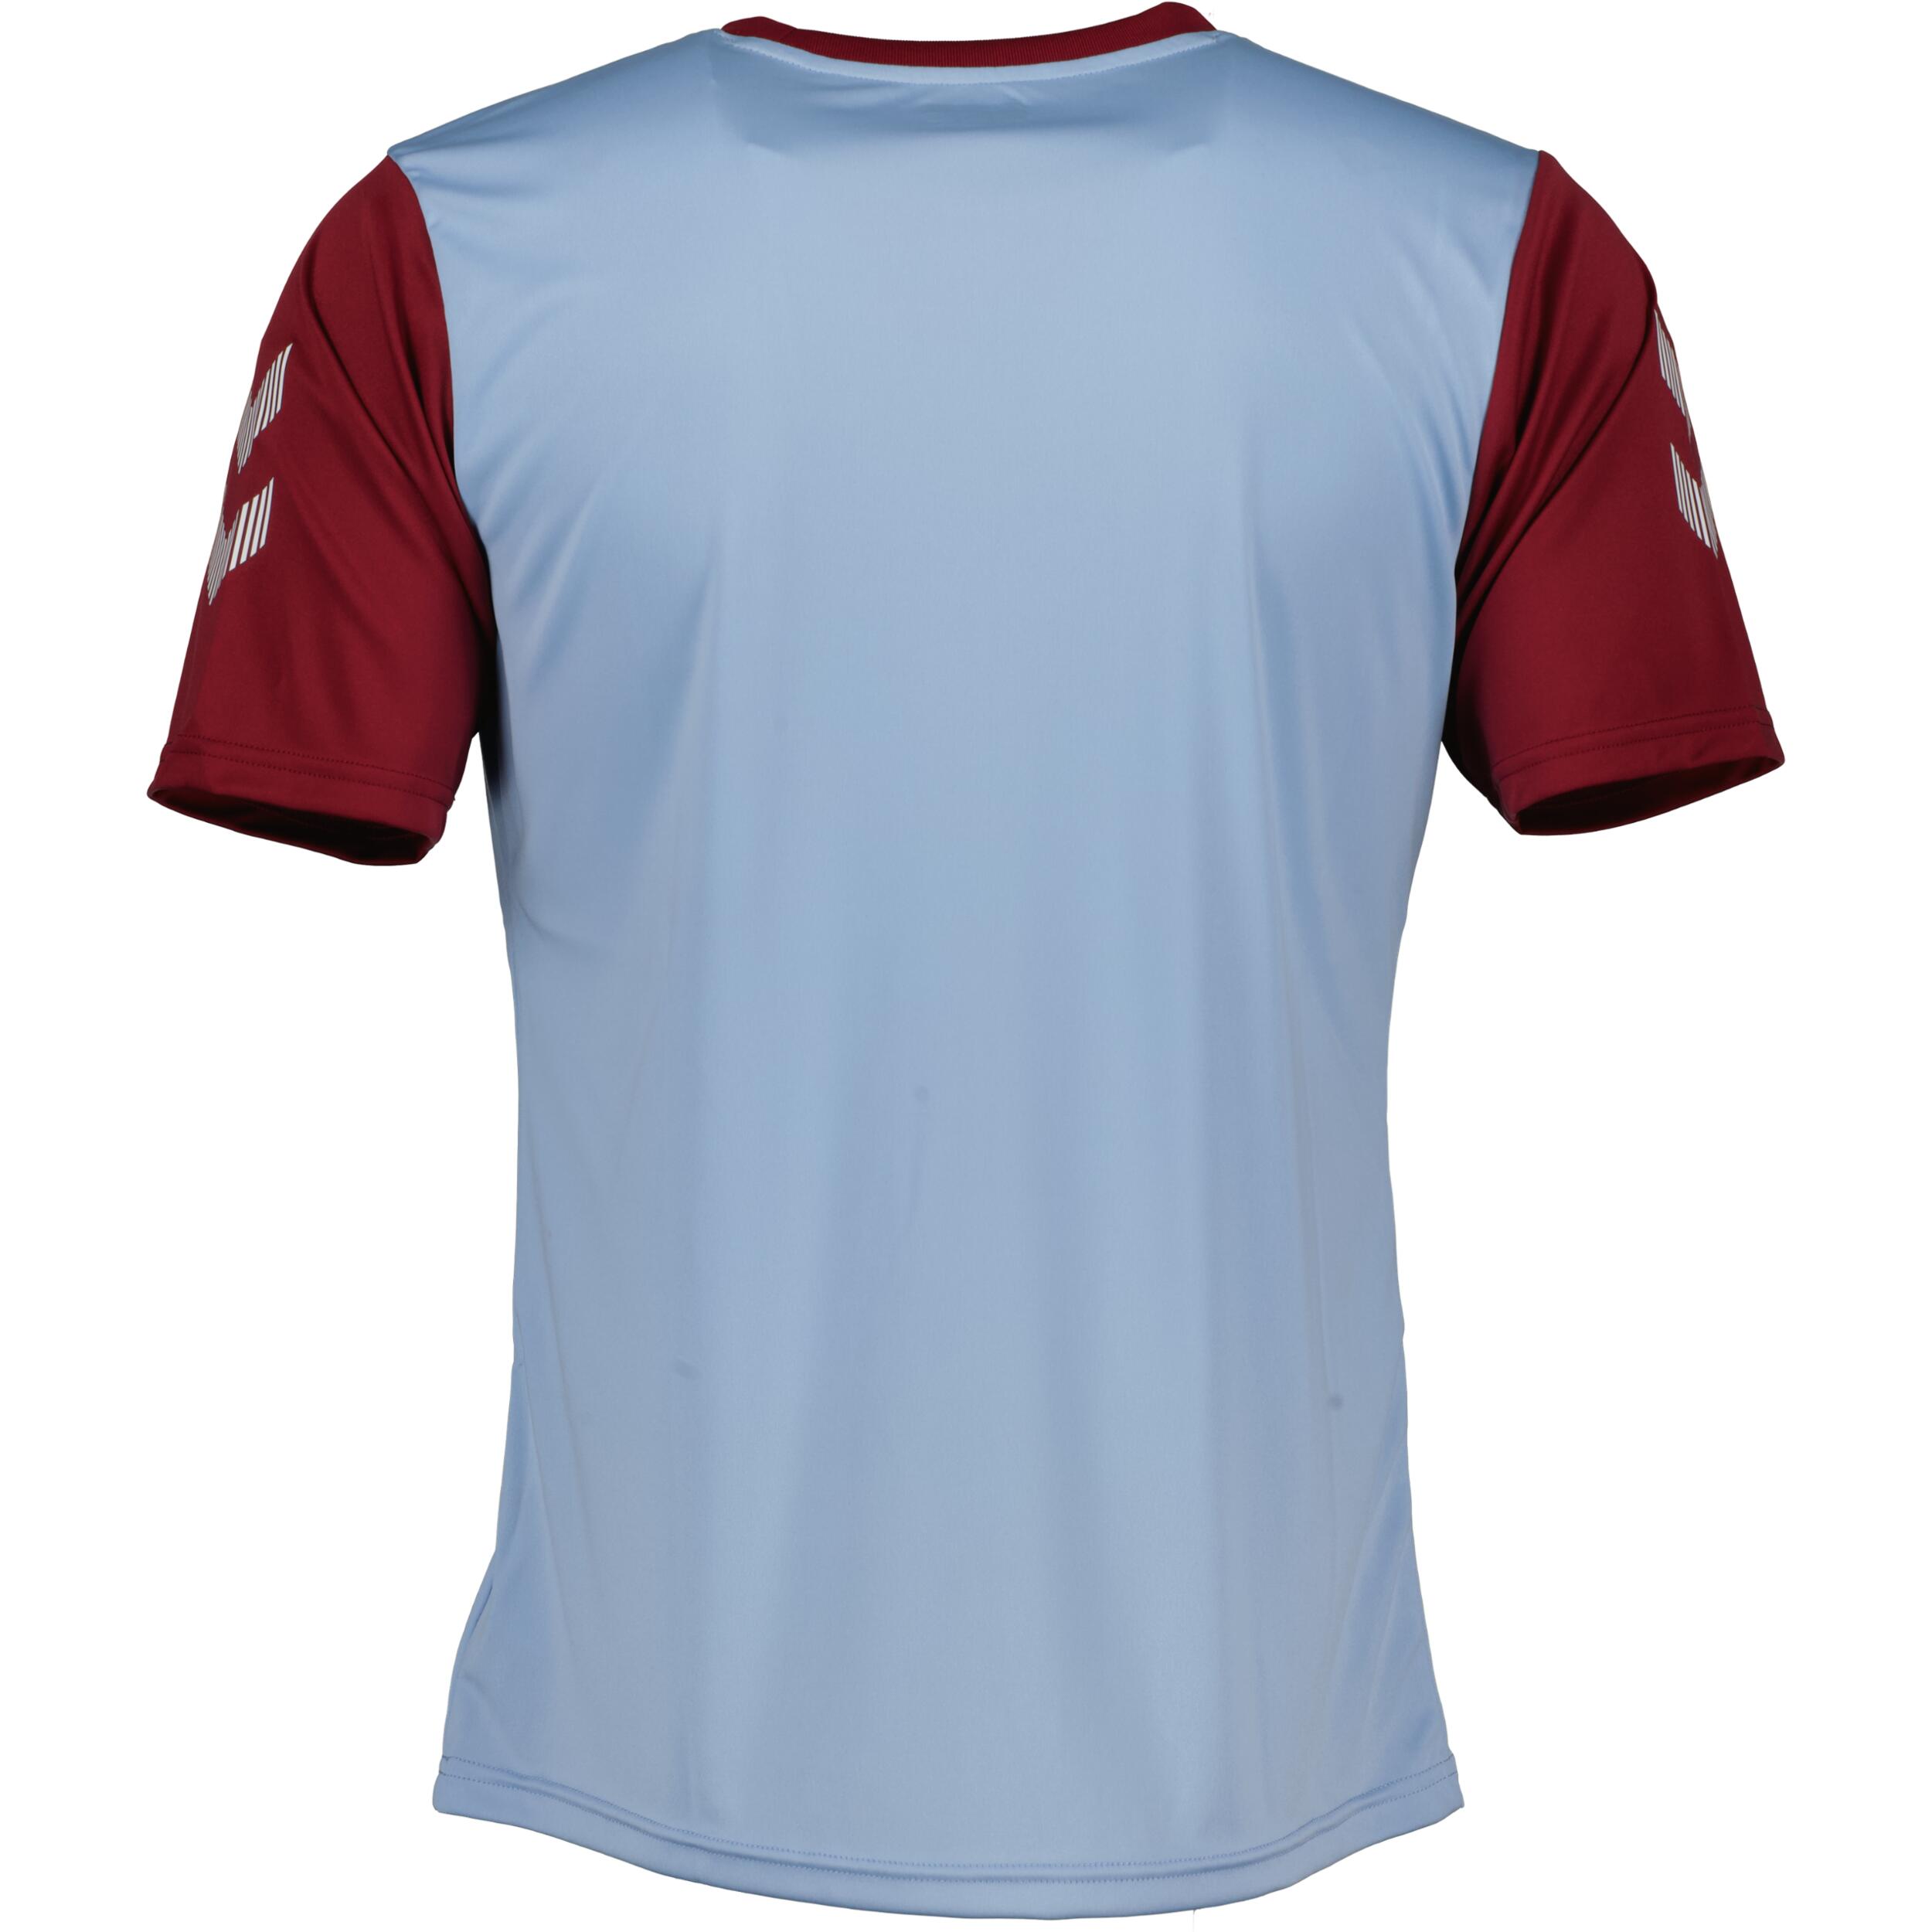 Match jersey for kids, great for football, in argentina blue/maroon 2/3